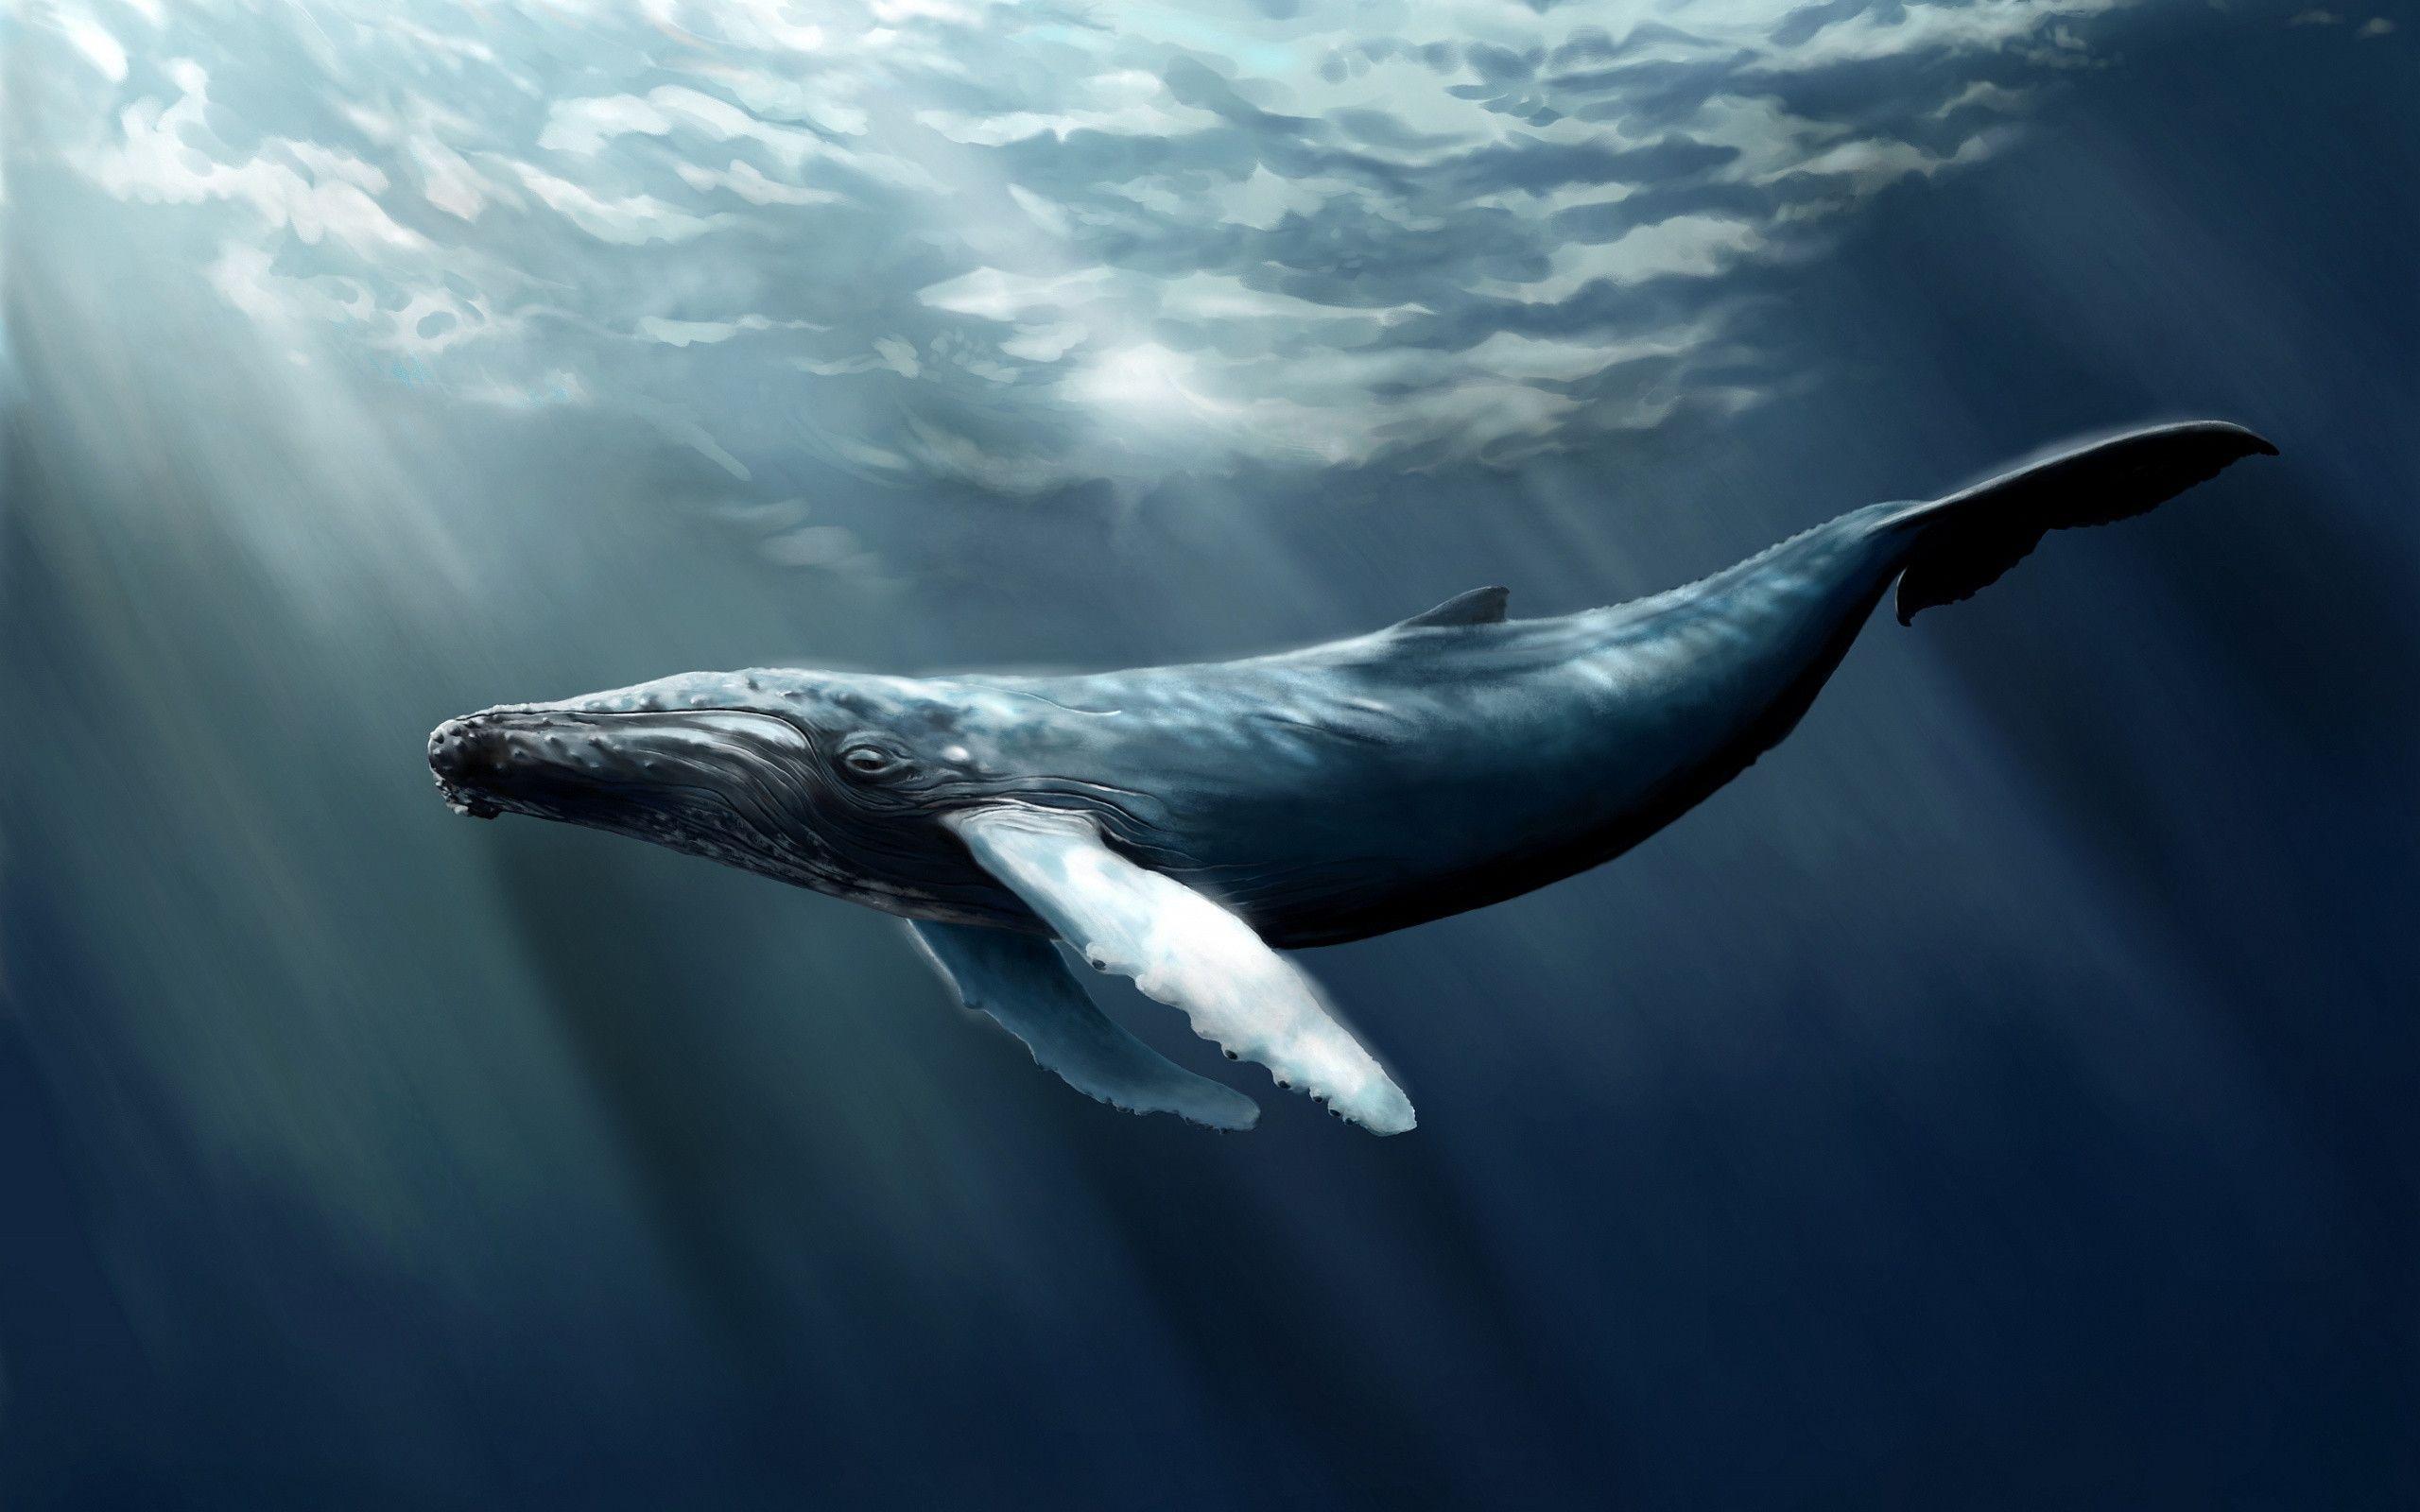 Giant Whale 4K iPhone Wallpaper  iPhone Wallpapers